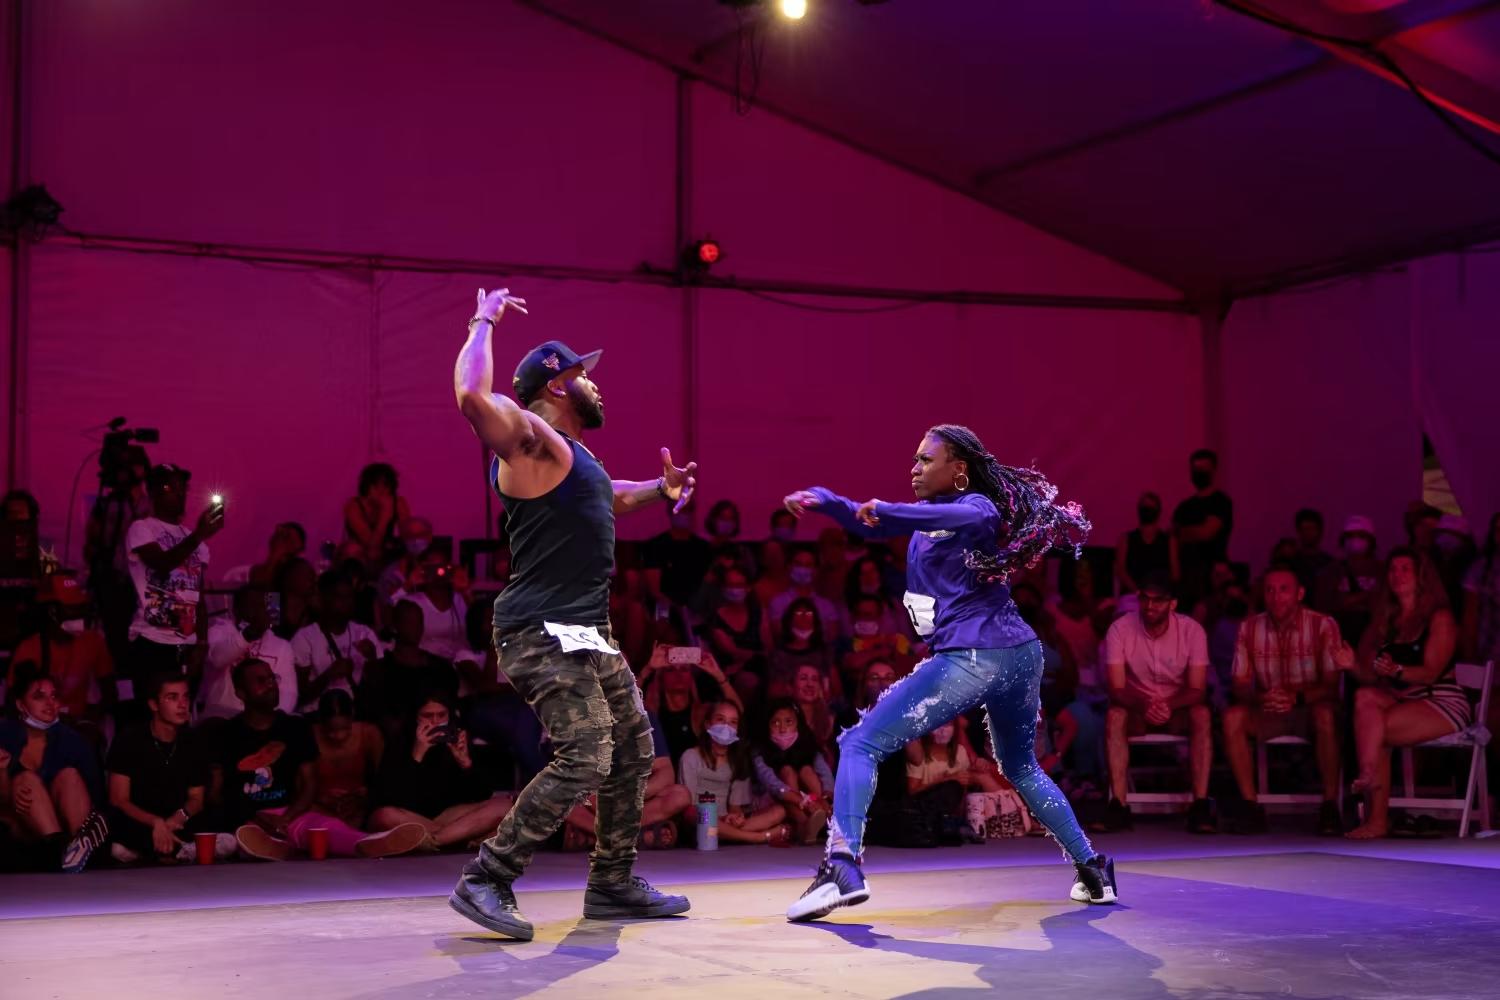 Two dancers in a dance battle against one another.